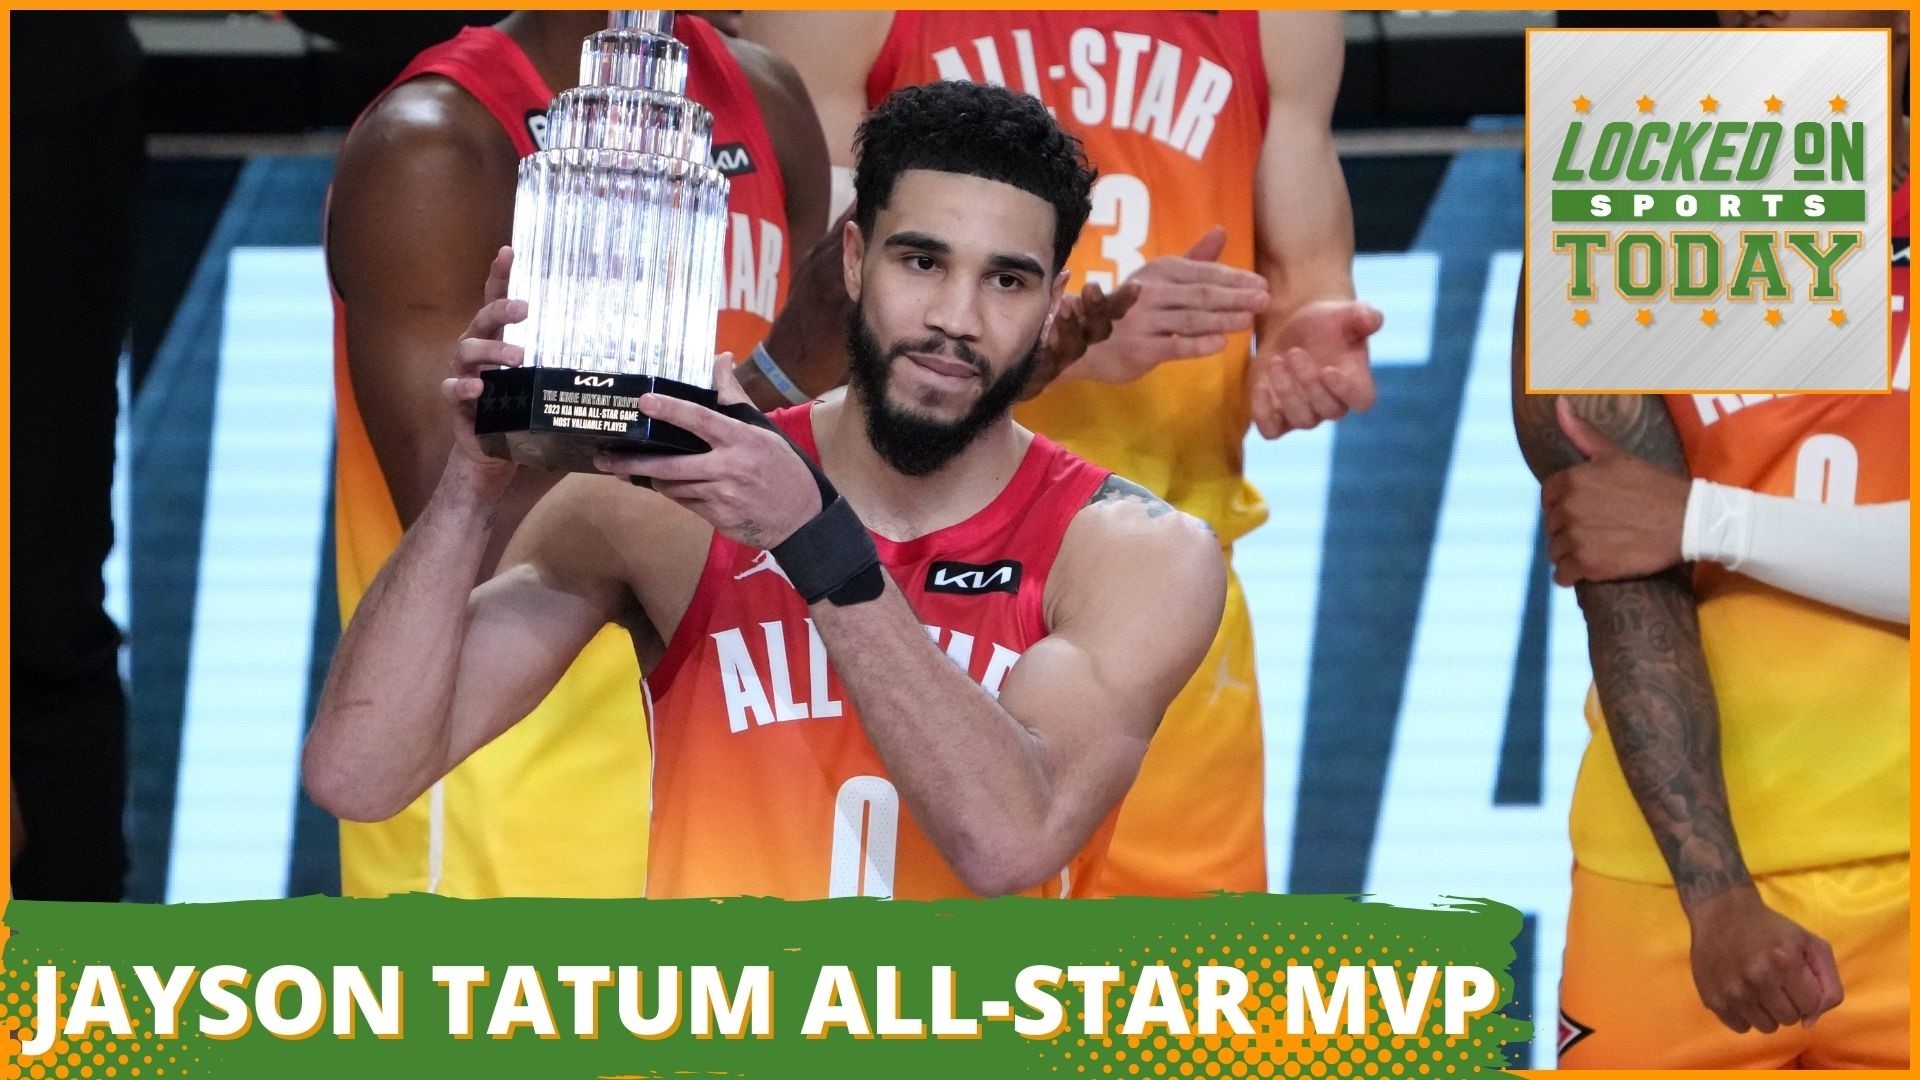 Discussing the day's top sport stories from Jayson Tatum being named All-Star MVP in the NBA to Aaron Rodgers darkness retreat to the top 2023 NFL draft picks.